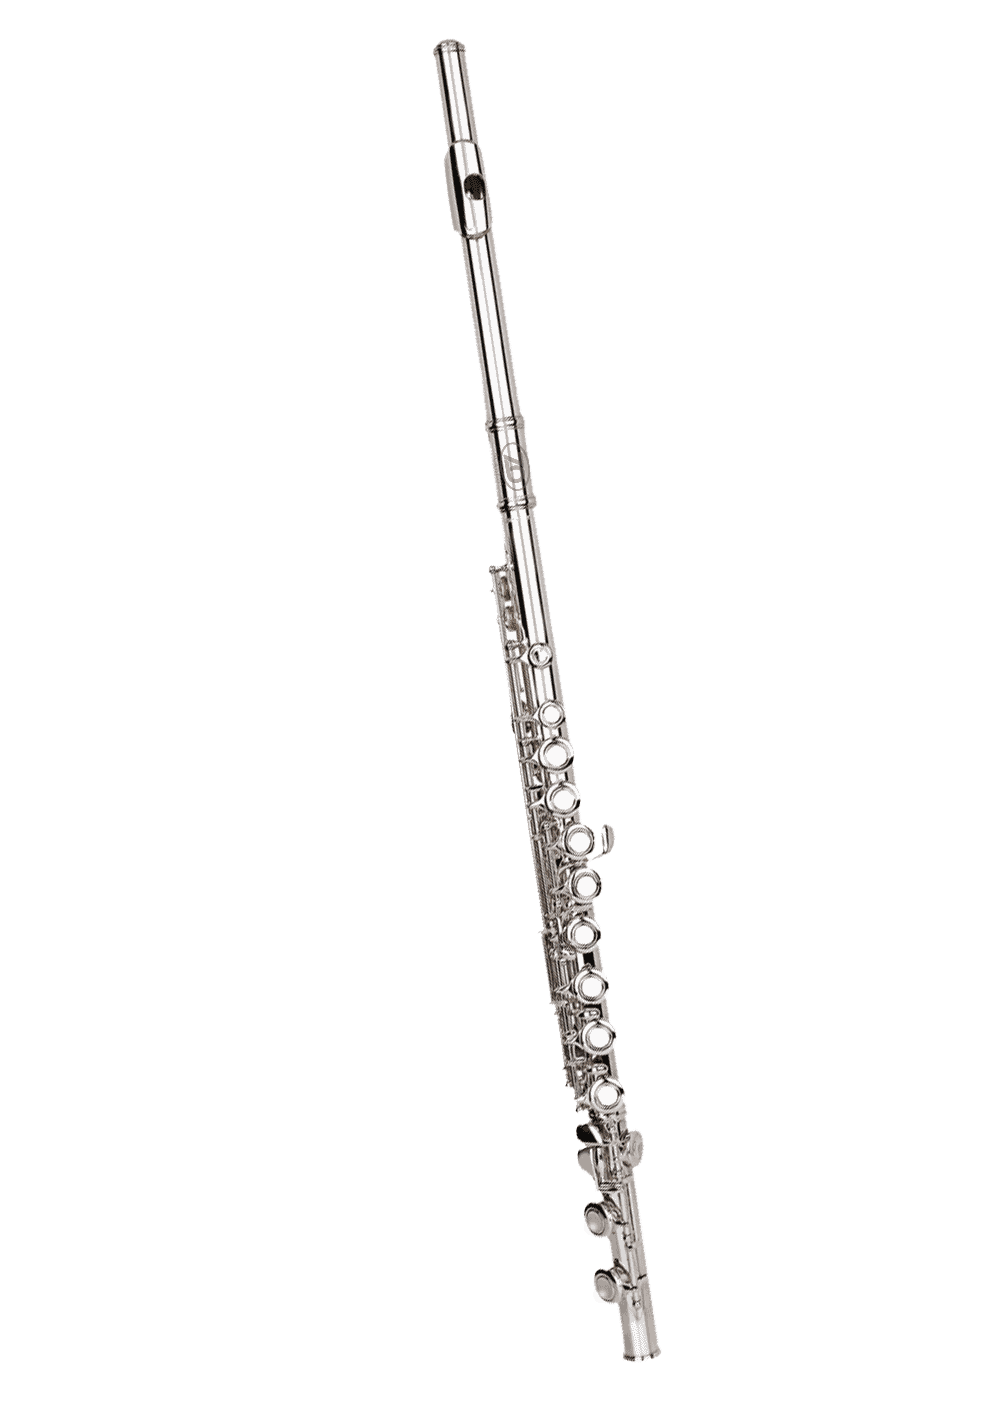 ZO Academy affordable flute for students